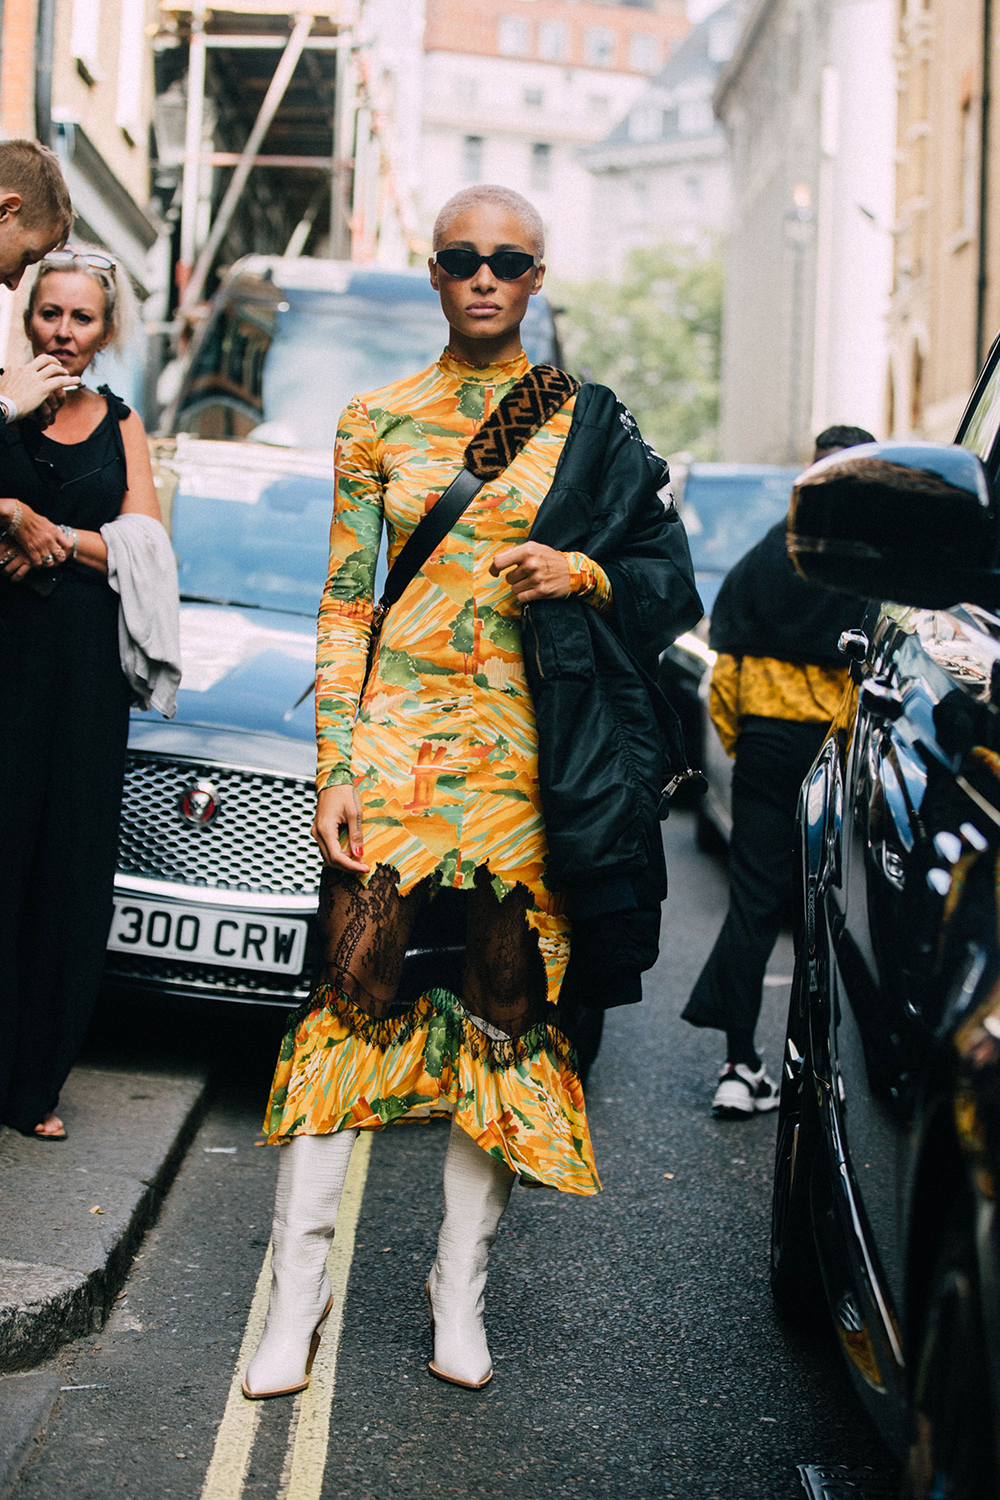 LONDON, ENGLAND - SEPTEMBER 15: Model Adwoa Aboah wears black sunglasses, a Fendi fur cross-body bag, yellow print dress, white boots, and a bomber jacket on one shoulders after the Molly Goddard show during London Fashion Week September 2018 on September 13, 2018 in London, England.